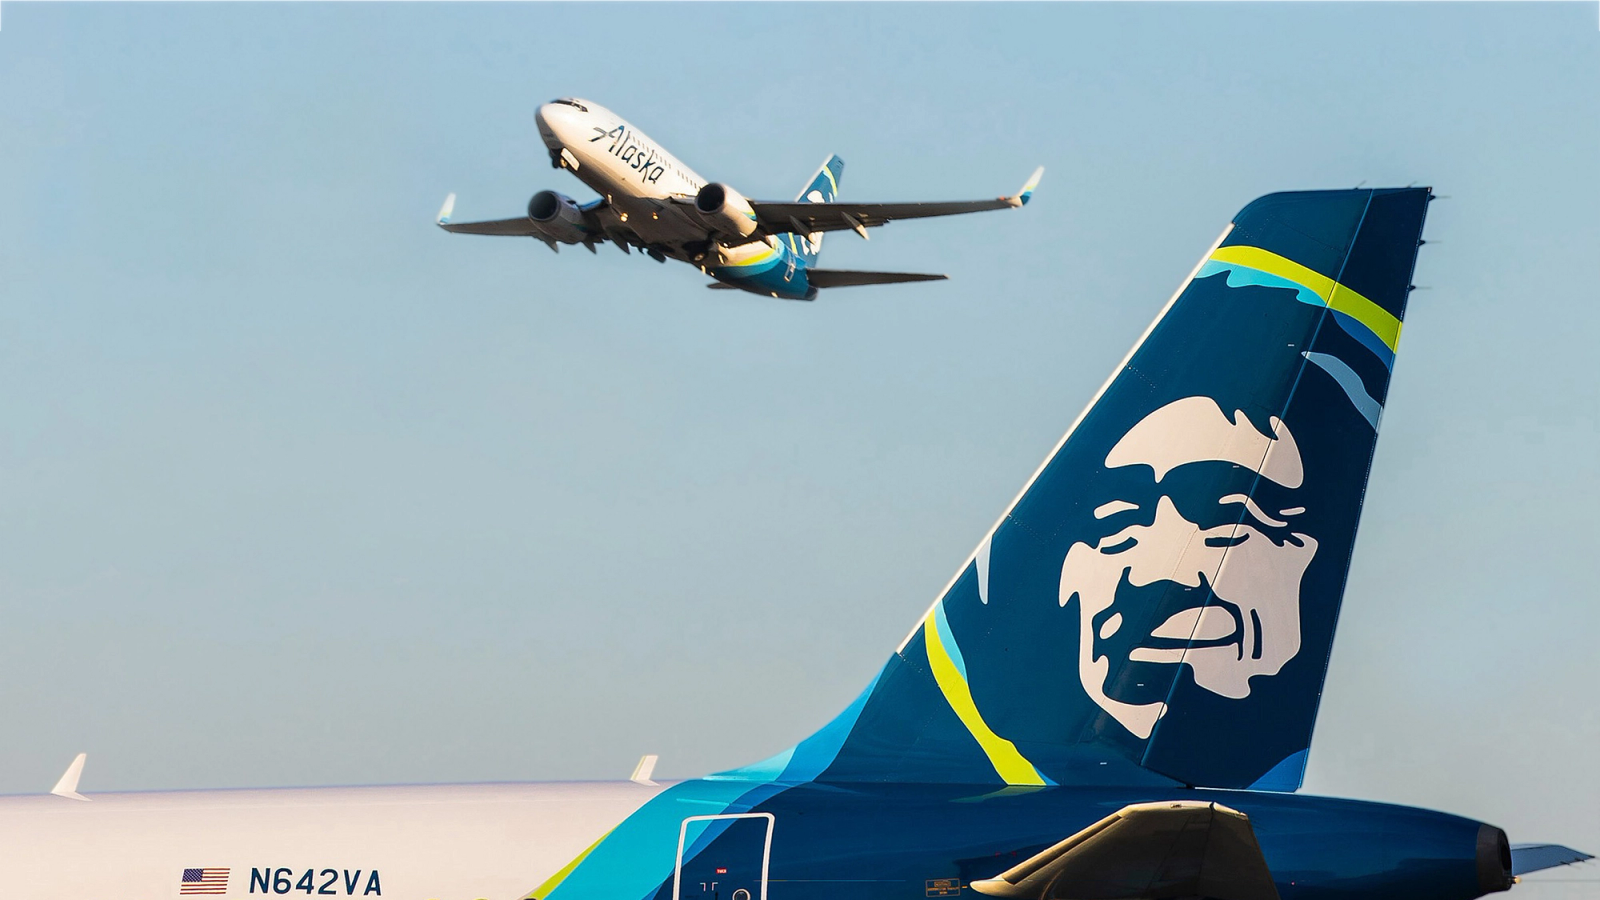 Alaska Airlines takes flight with their new LMS